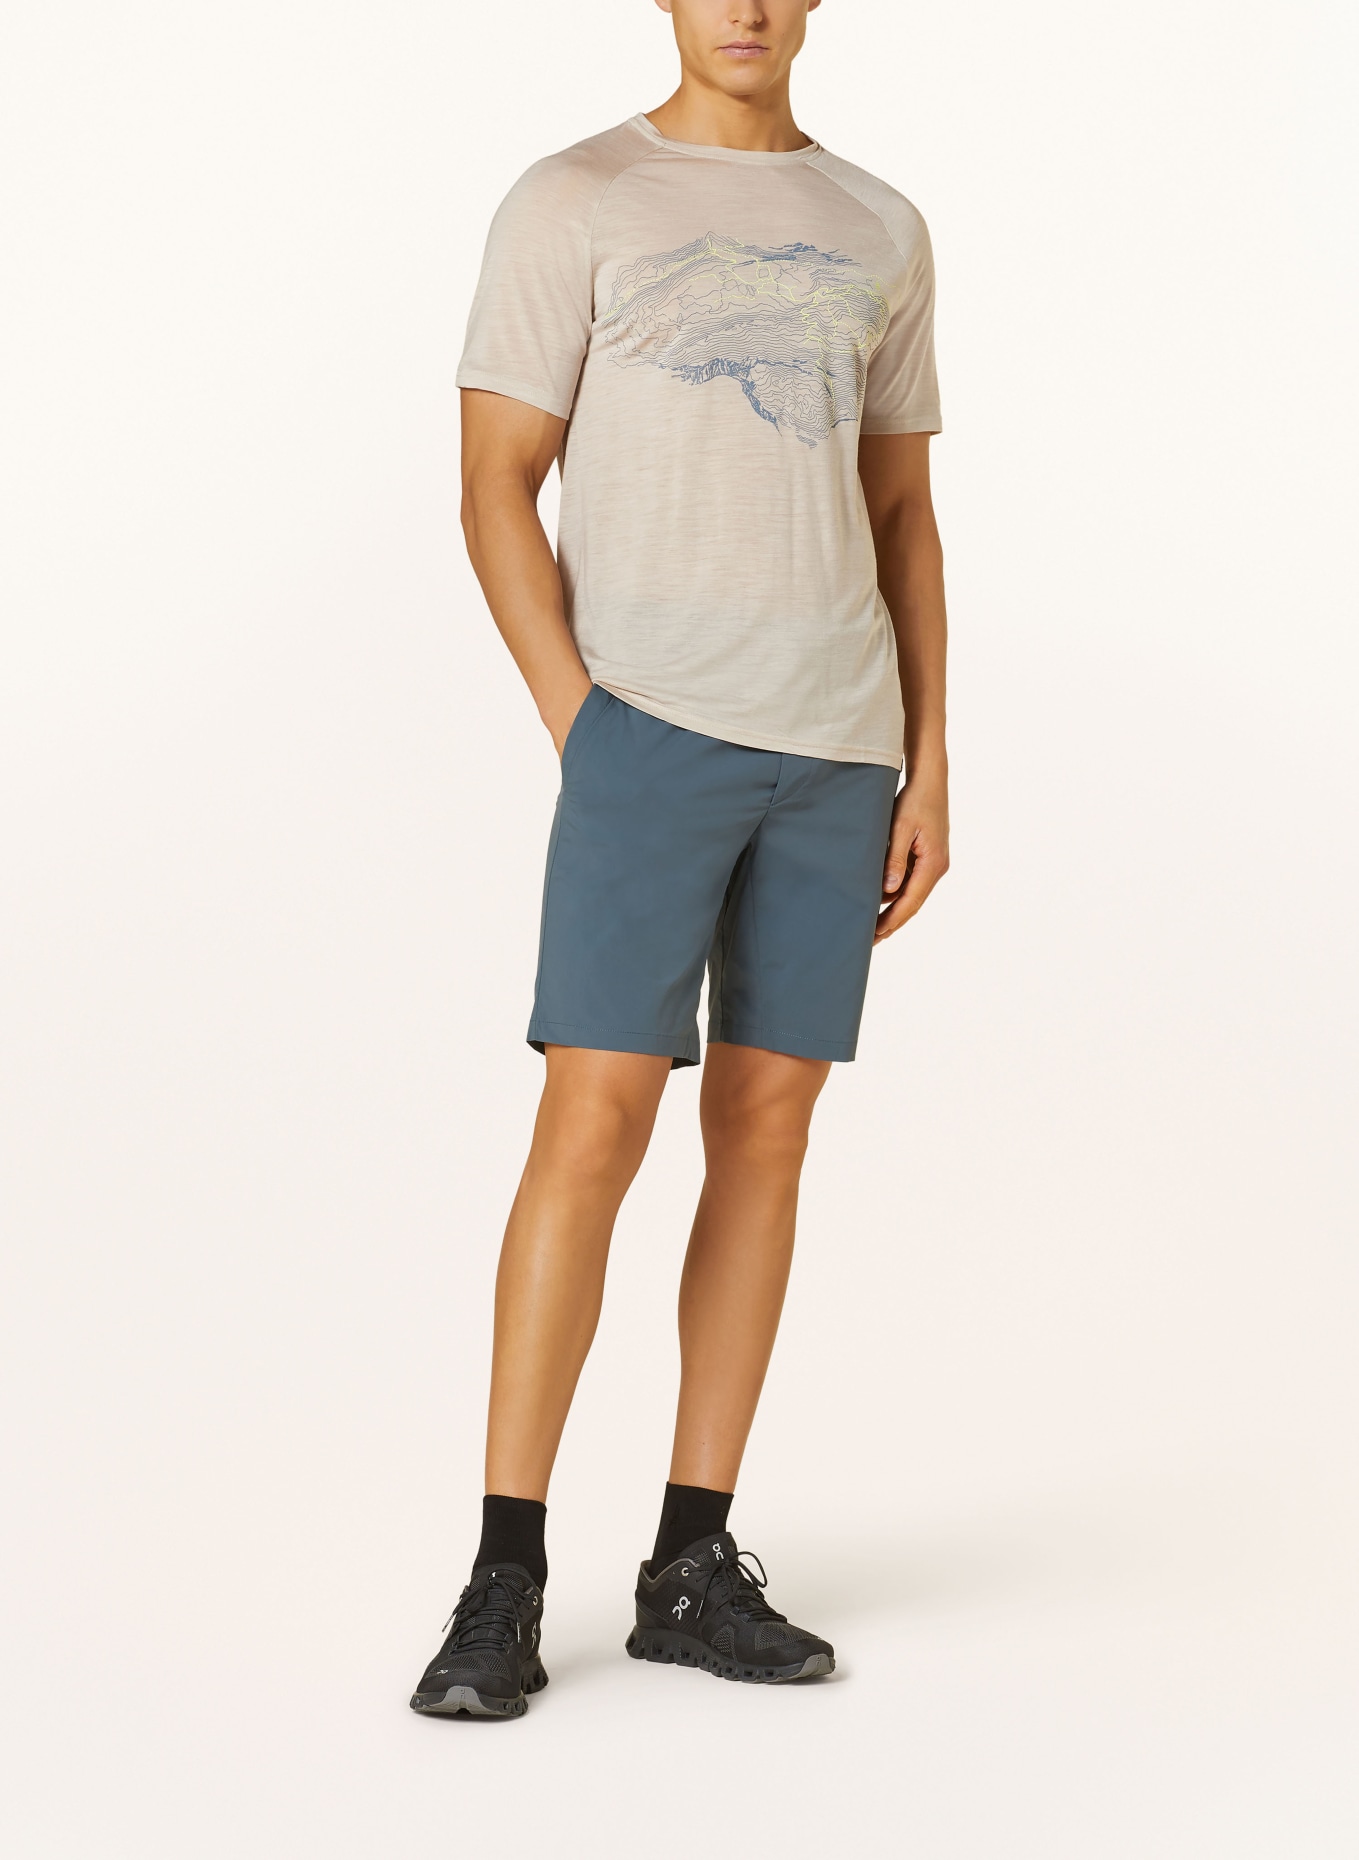 odlo T-shirt ASCENT with merino wool, Color: BEIGE (Image 2)